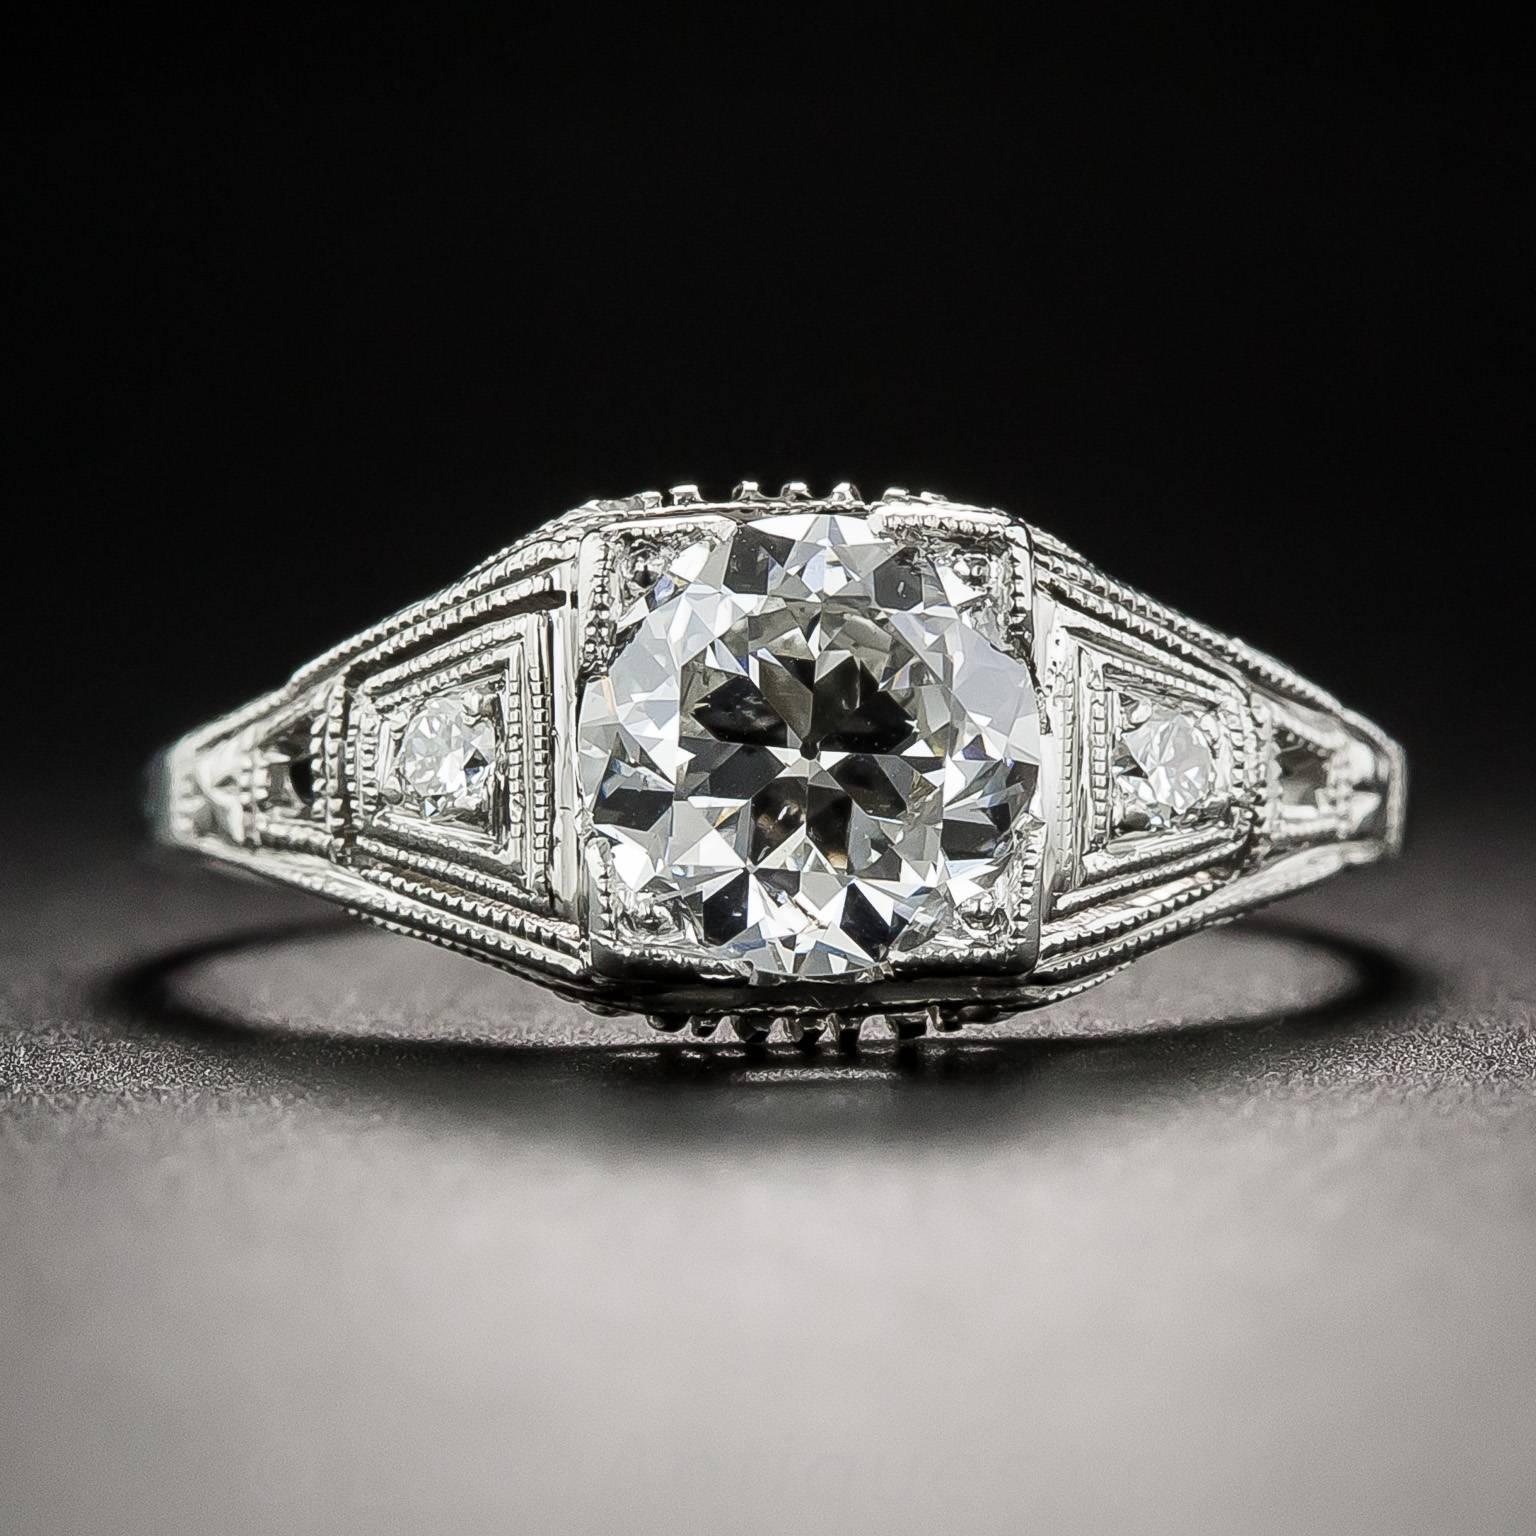 Little known to the public at large, but long admired by professional jewelers, the "Certified" stamp of Katz & Ogush has long been a mark of the highest quality Art Deco jewels, and here is a case in point. Centering on a bright white